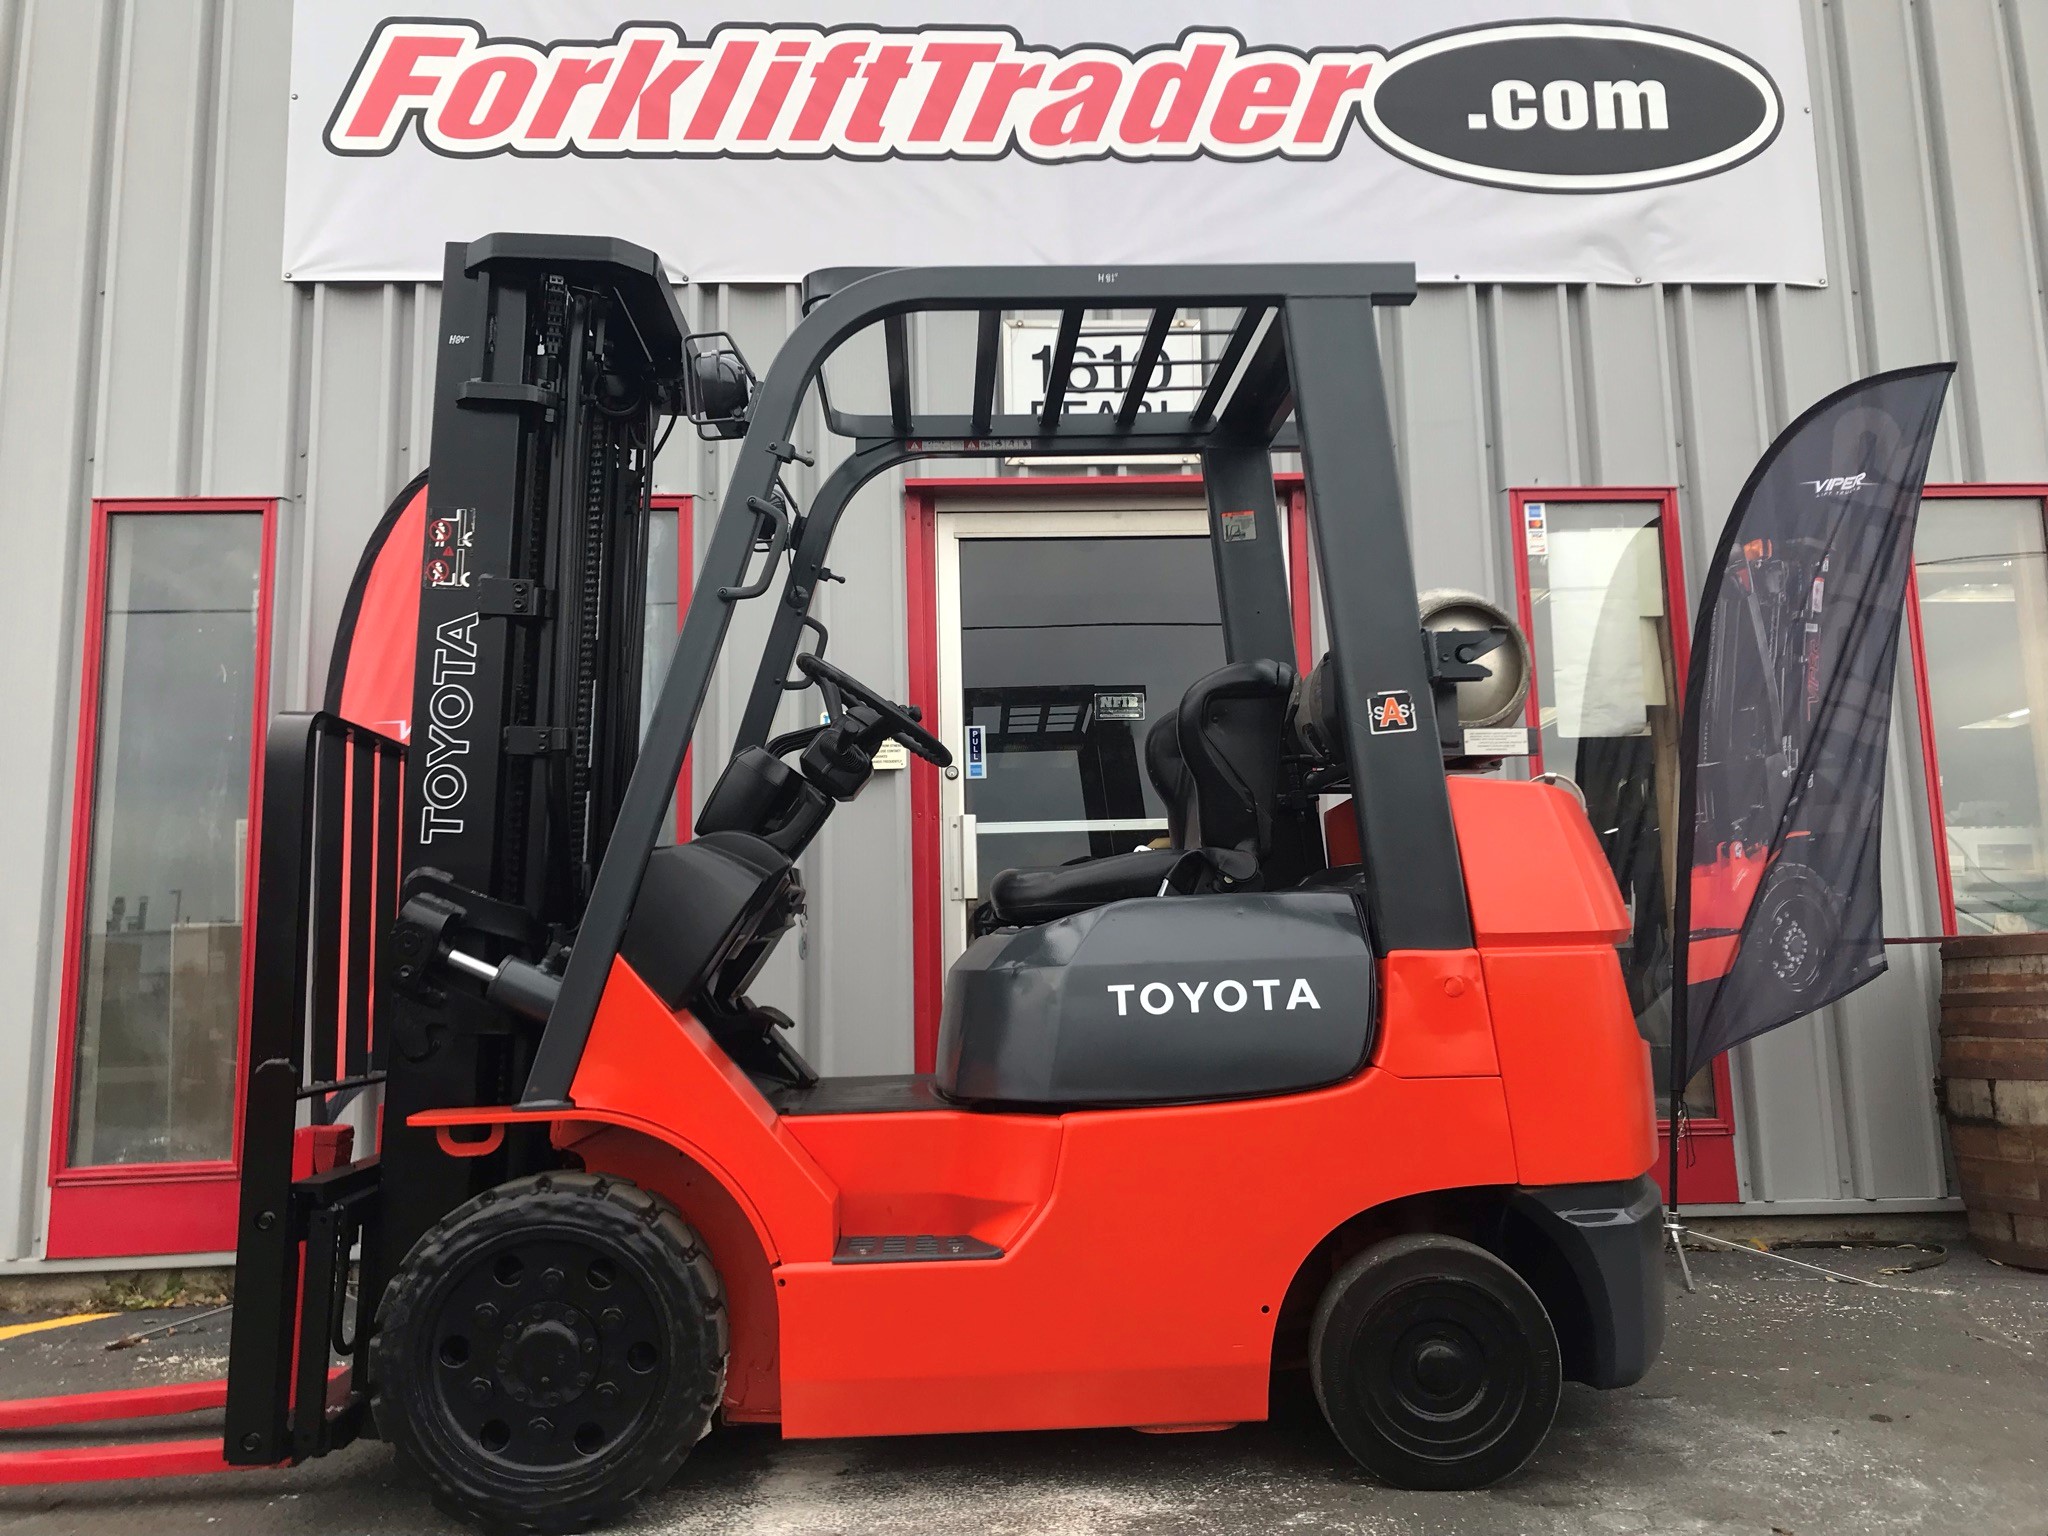 Orange 2004 toyota forklift with 189" lift height for sale